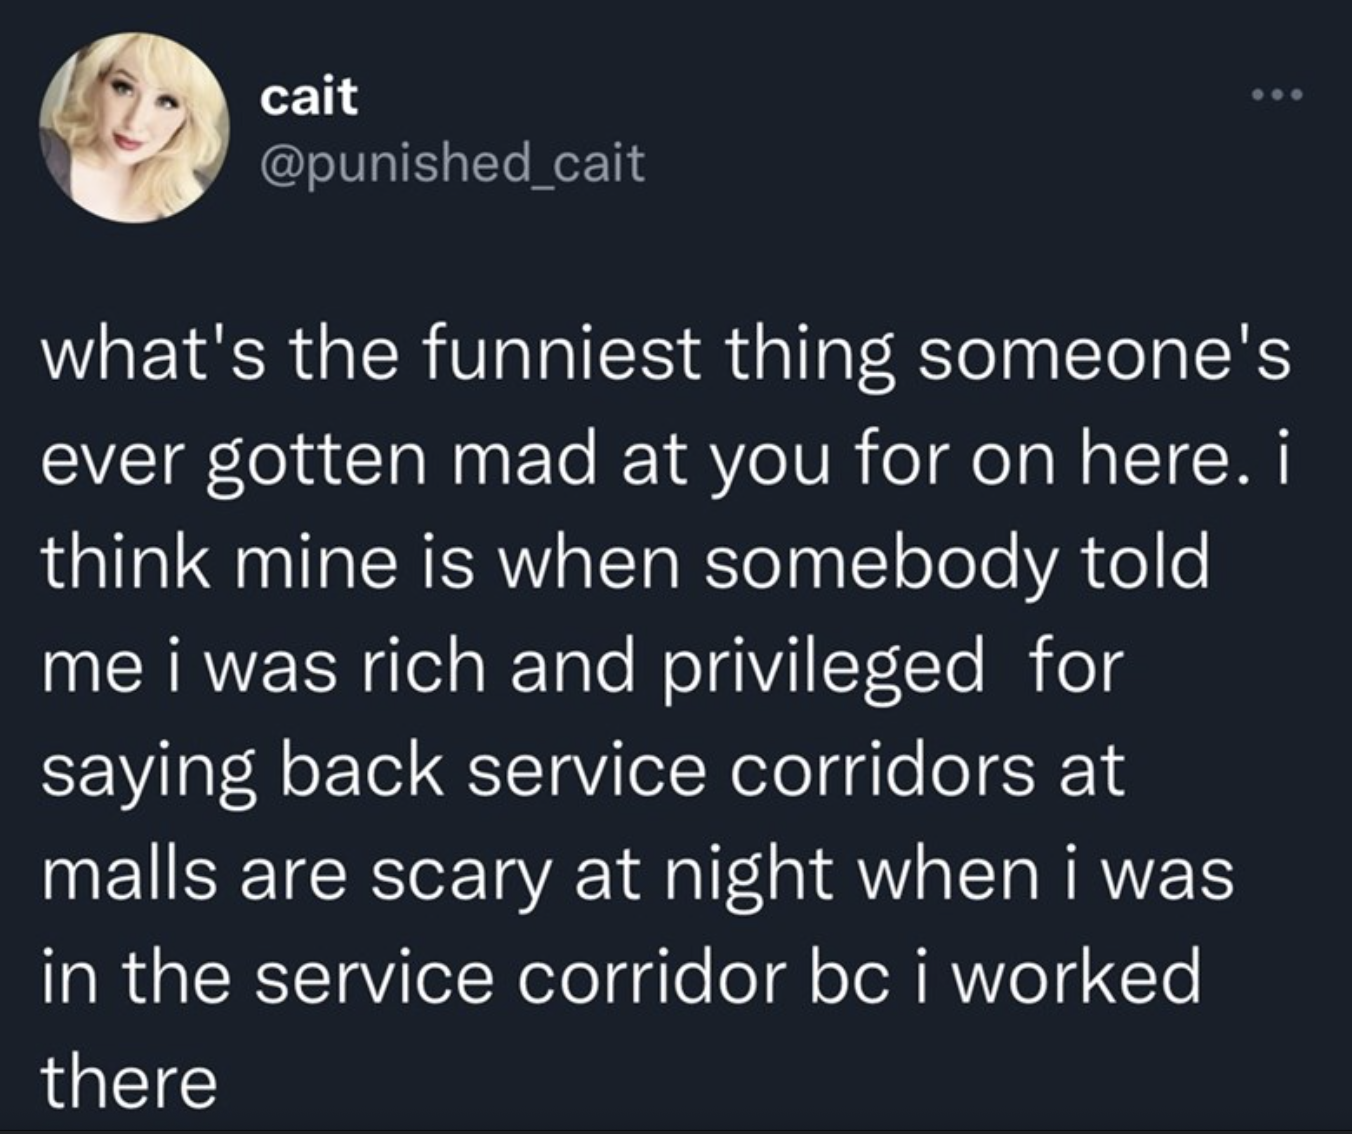 controversial twitter opinions - what's the funniest thing someone's ever gotten mad at you for on here. i think mine is when somebody told me i was rich and privileged for saying back service corridors at malls are scary at night when i was in the service corridor bc i worked there Buf